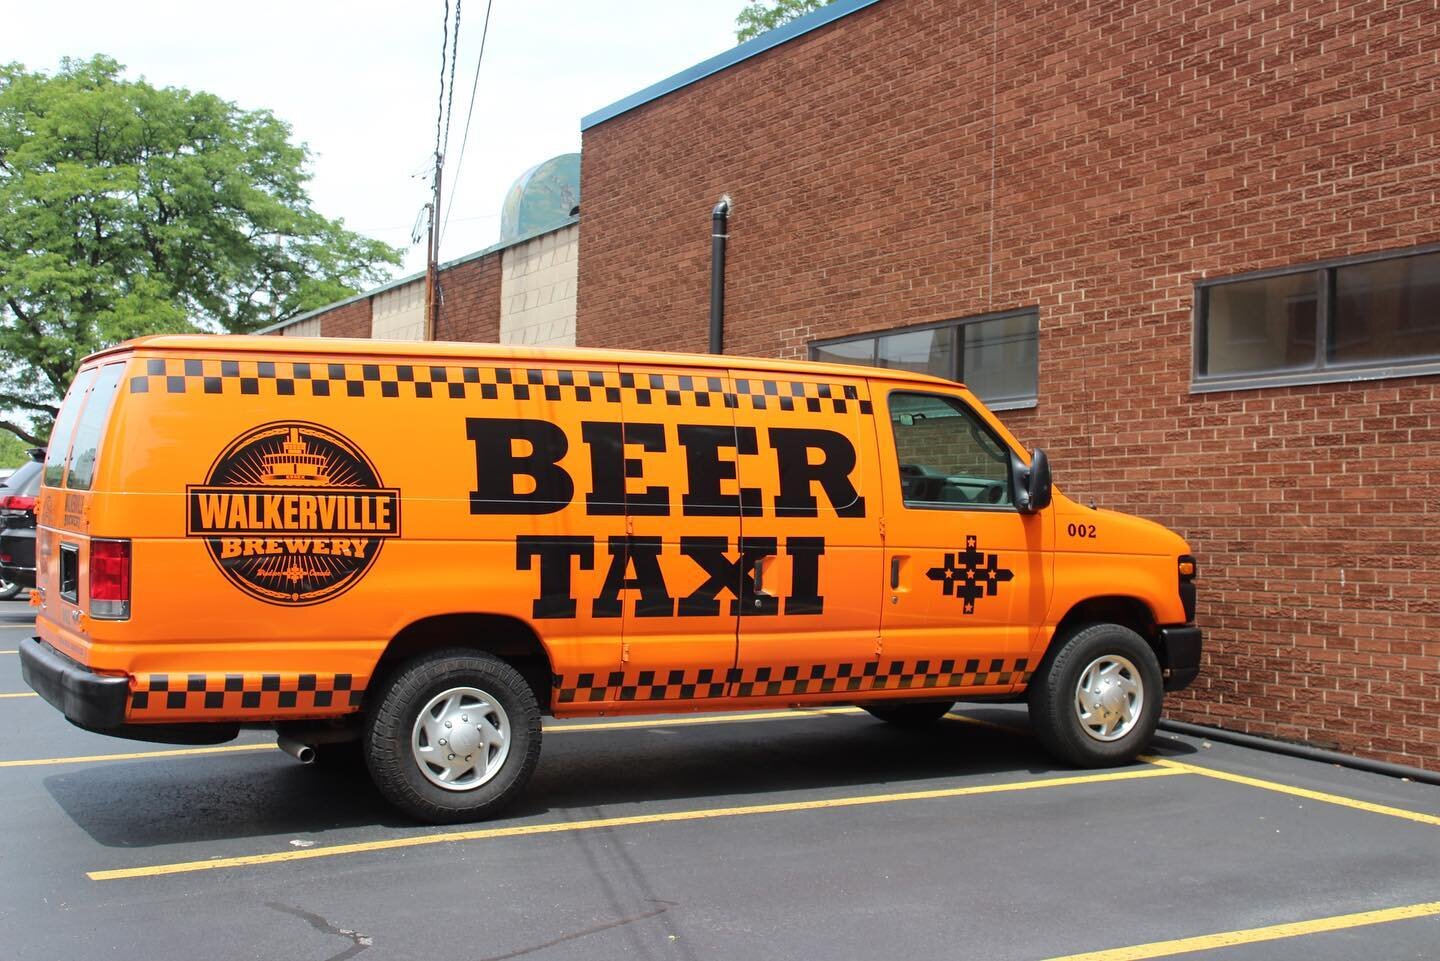 Have @walkervillebrewery beer delivered right to your door step! 🚚 

Learn more about free local delivery when you spend $35 &amp; select your favourite beers &amp; ciders online today!

https://www.walkervillebrewery.com/store

#visitwalkerville #w